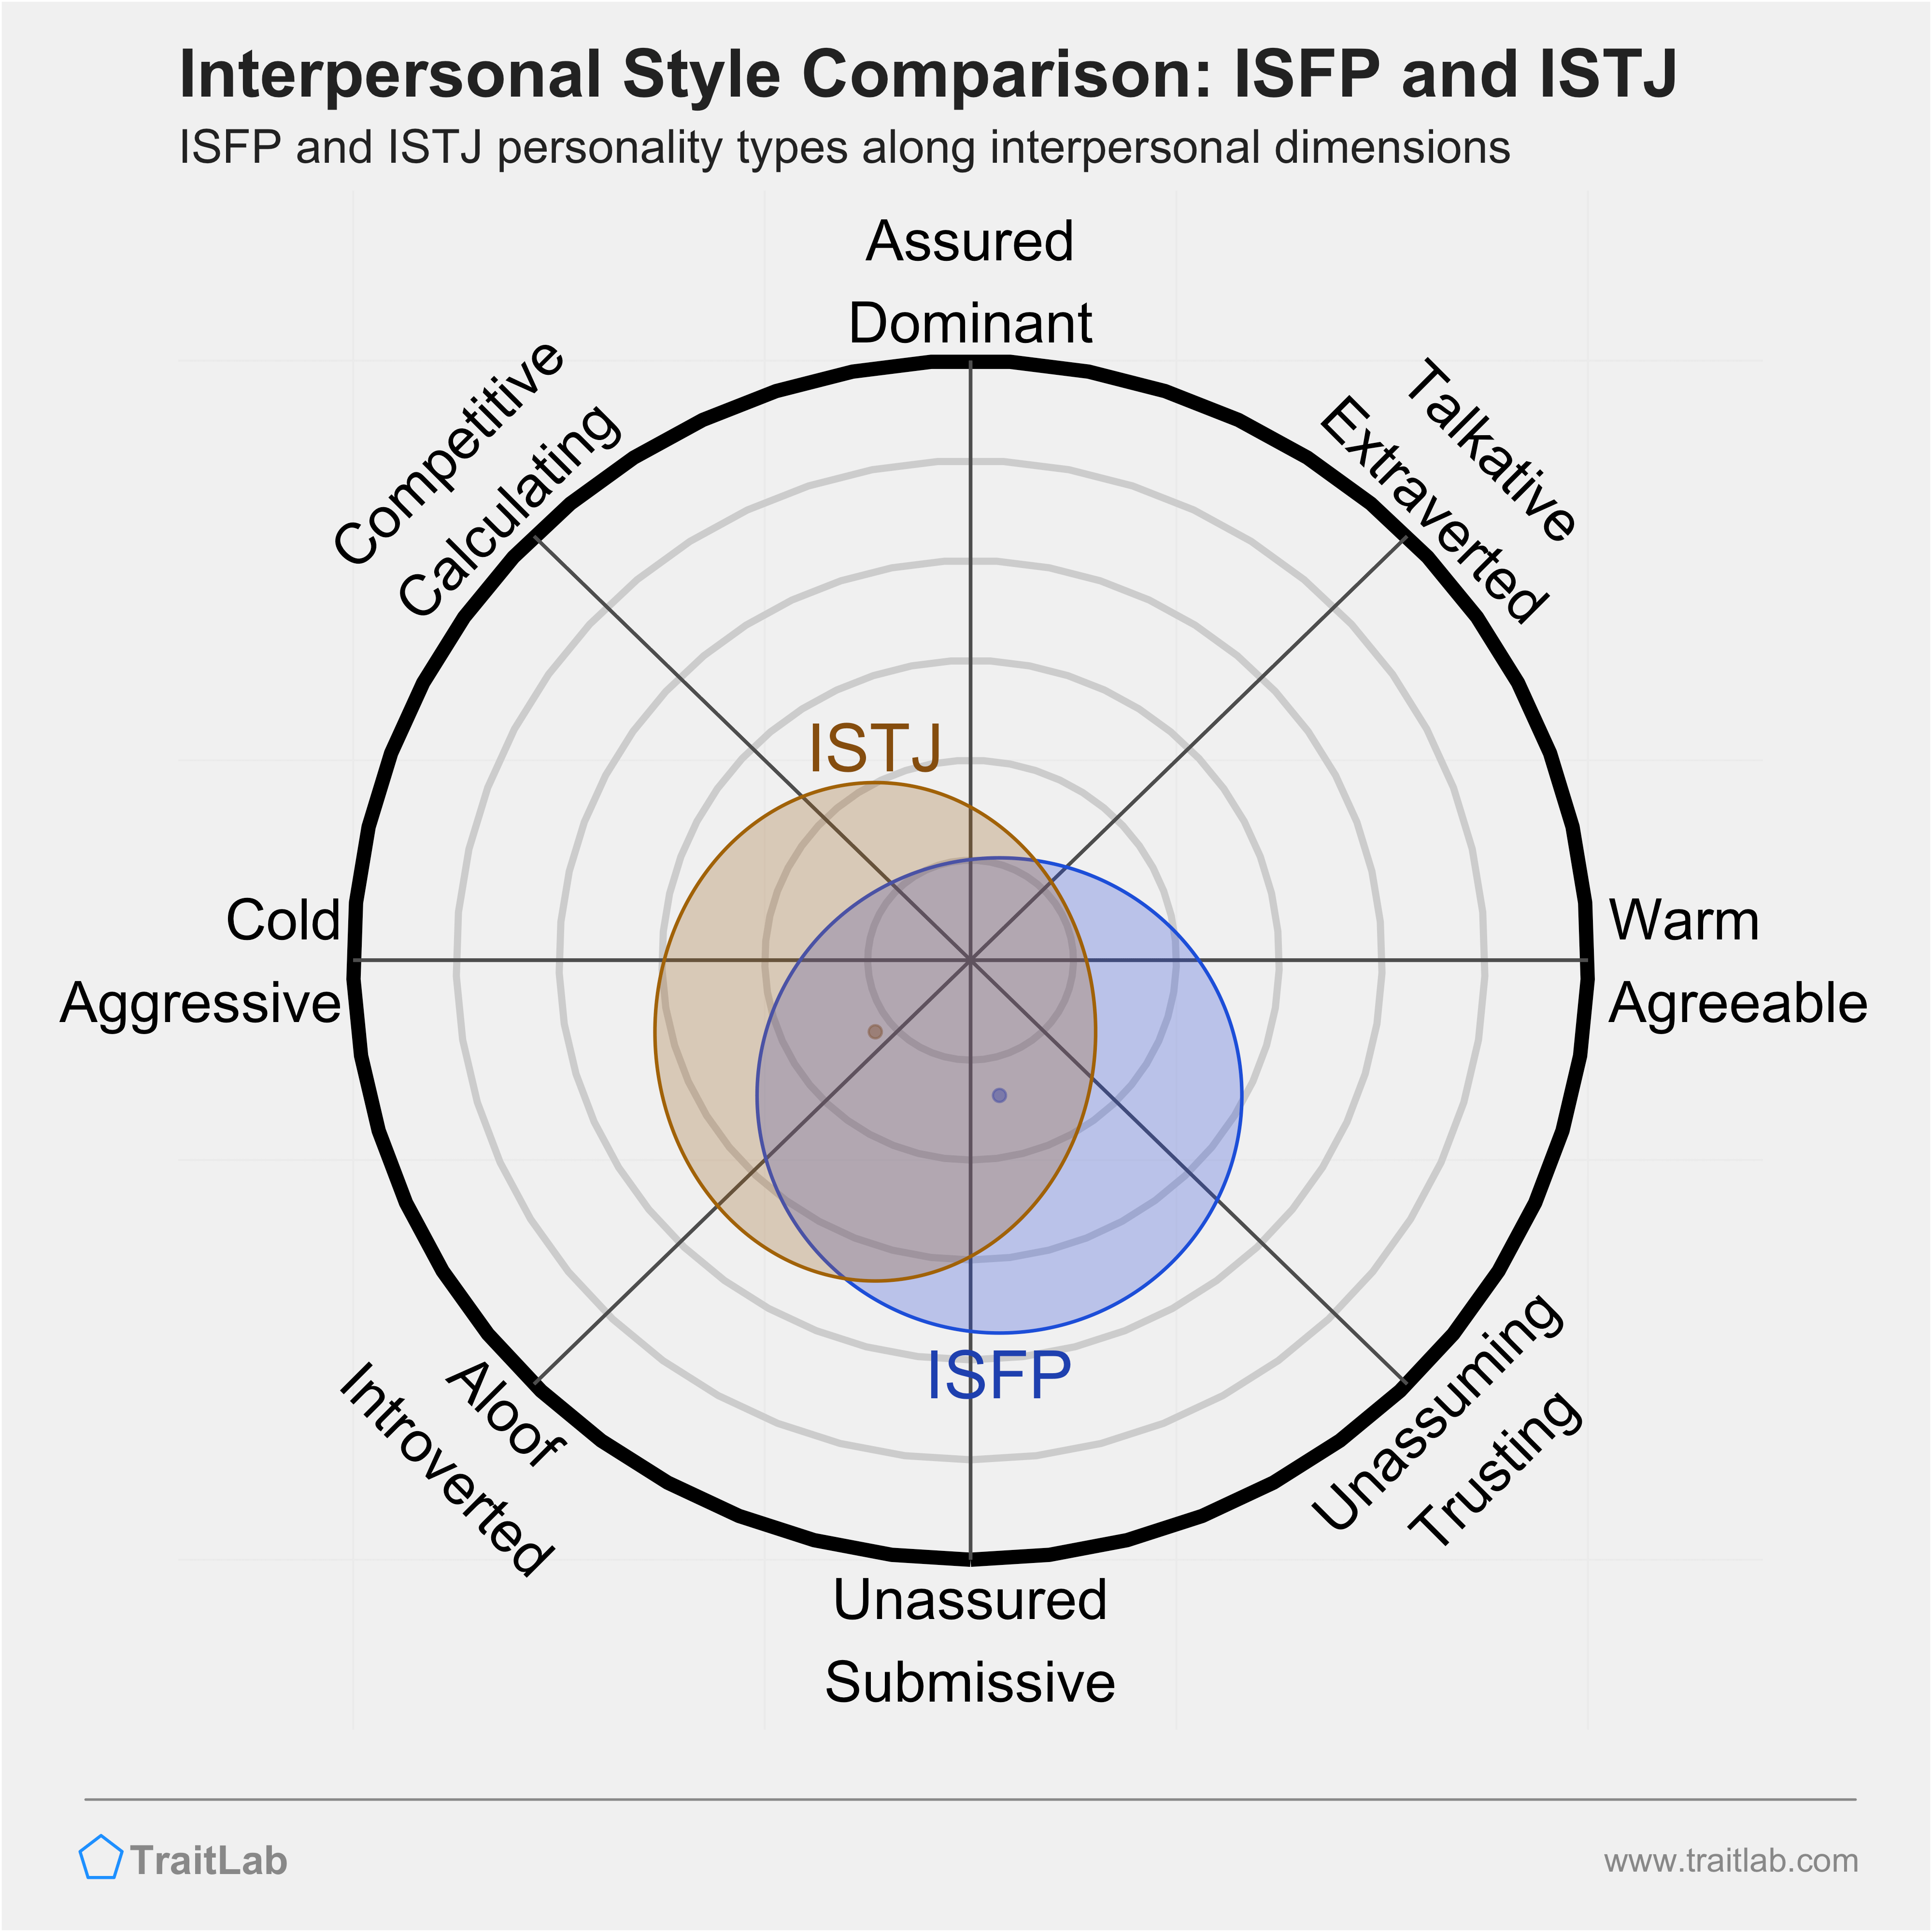 ISFP and ISTJ comparison across interpersonal dimensions